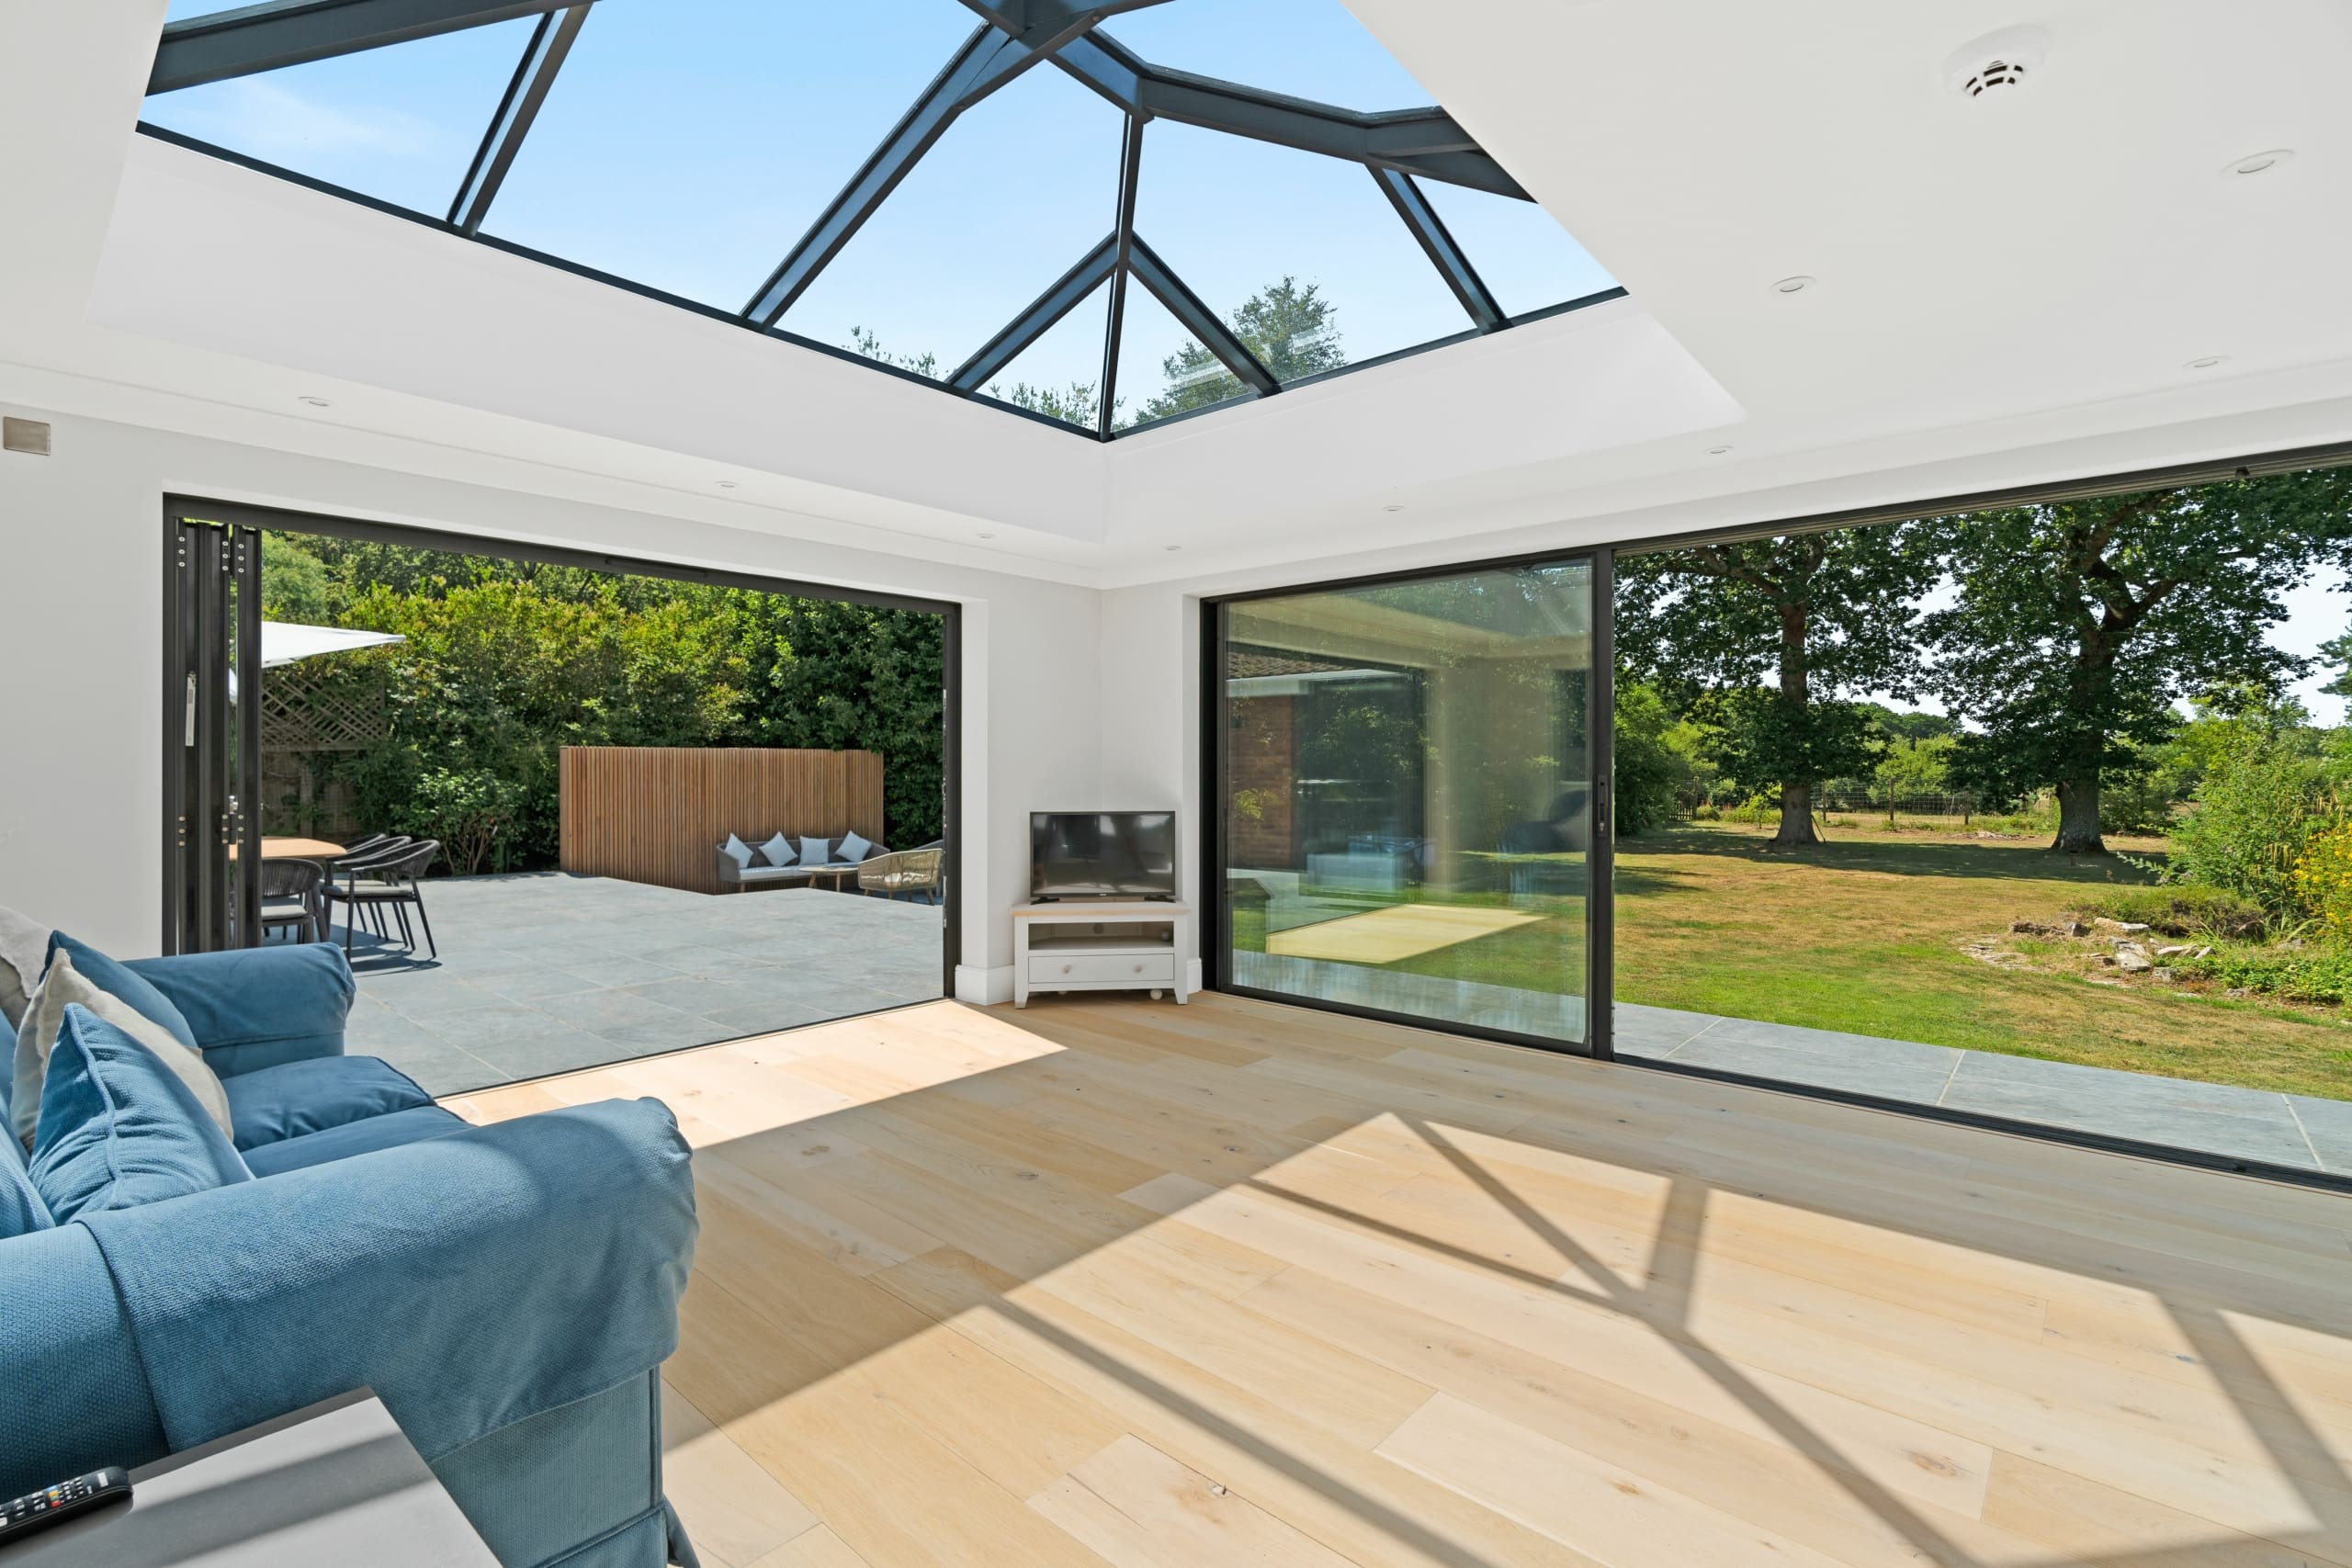 Beautiful modern extension with black aluminium glazing including sliding doors and roof lantern.